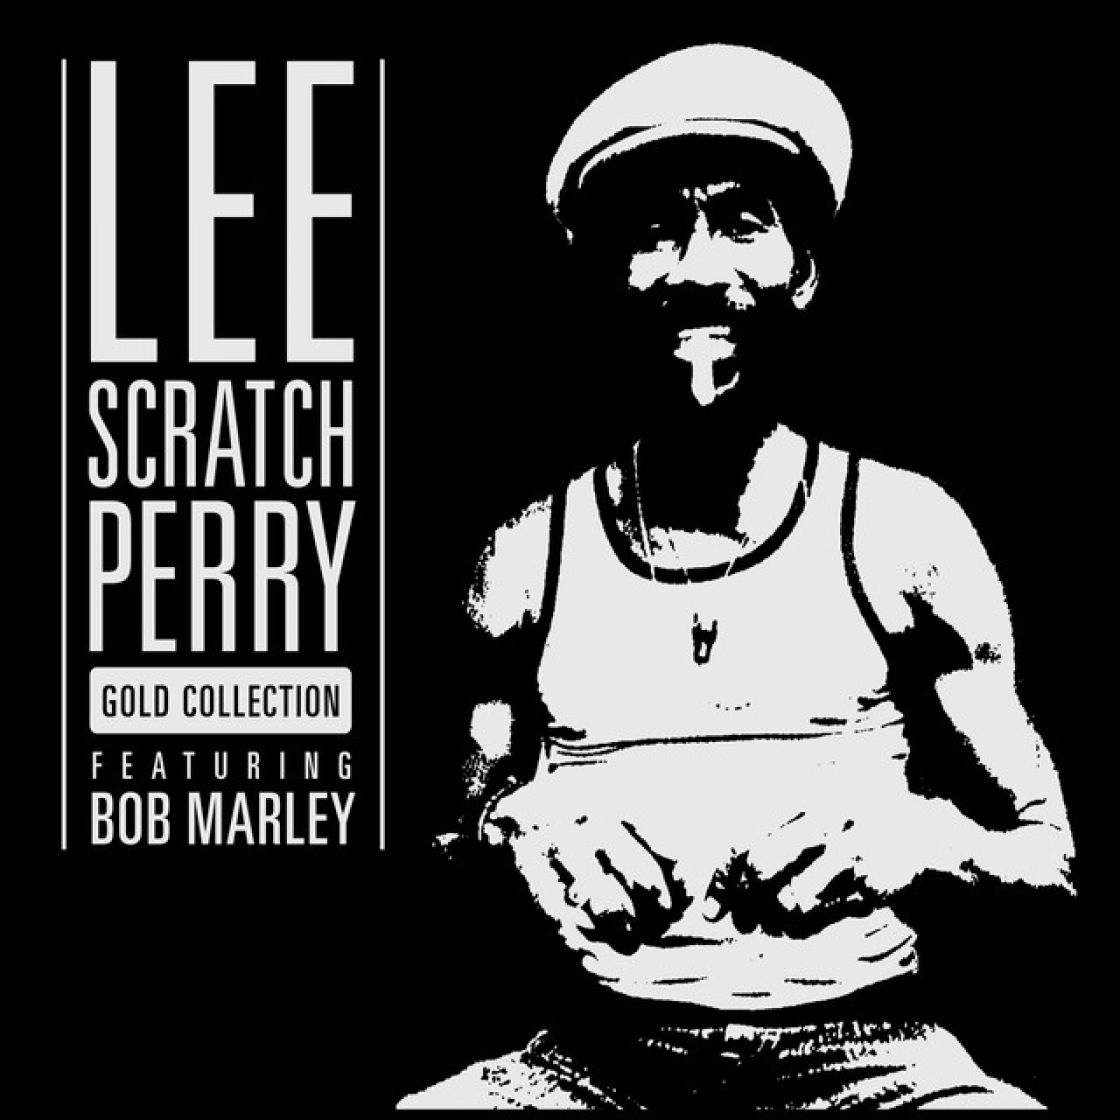 The New Song Rebel Soul by Lee (Scratch) Perry and The Upsetters meet Augustus Pablo